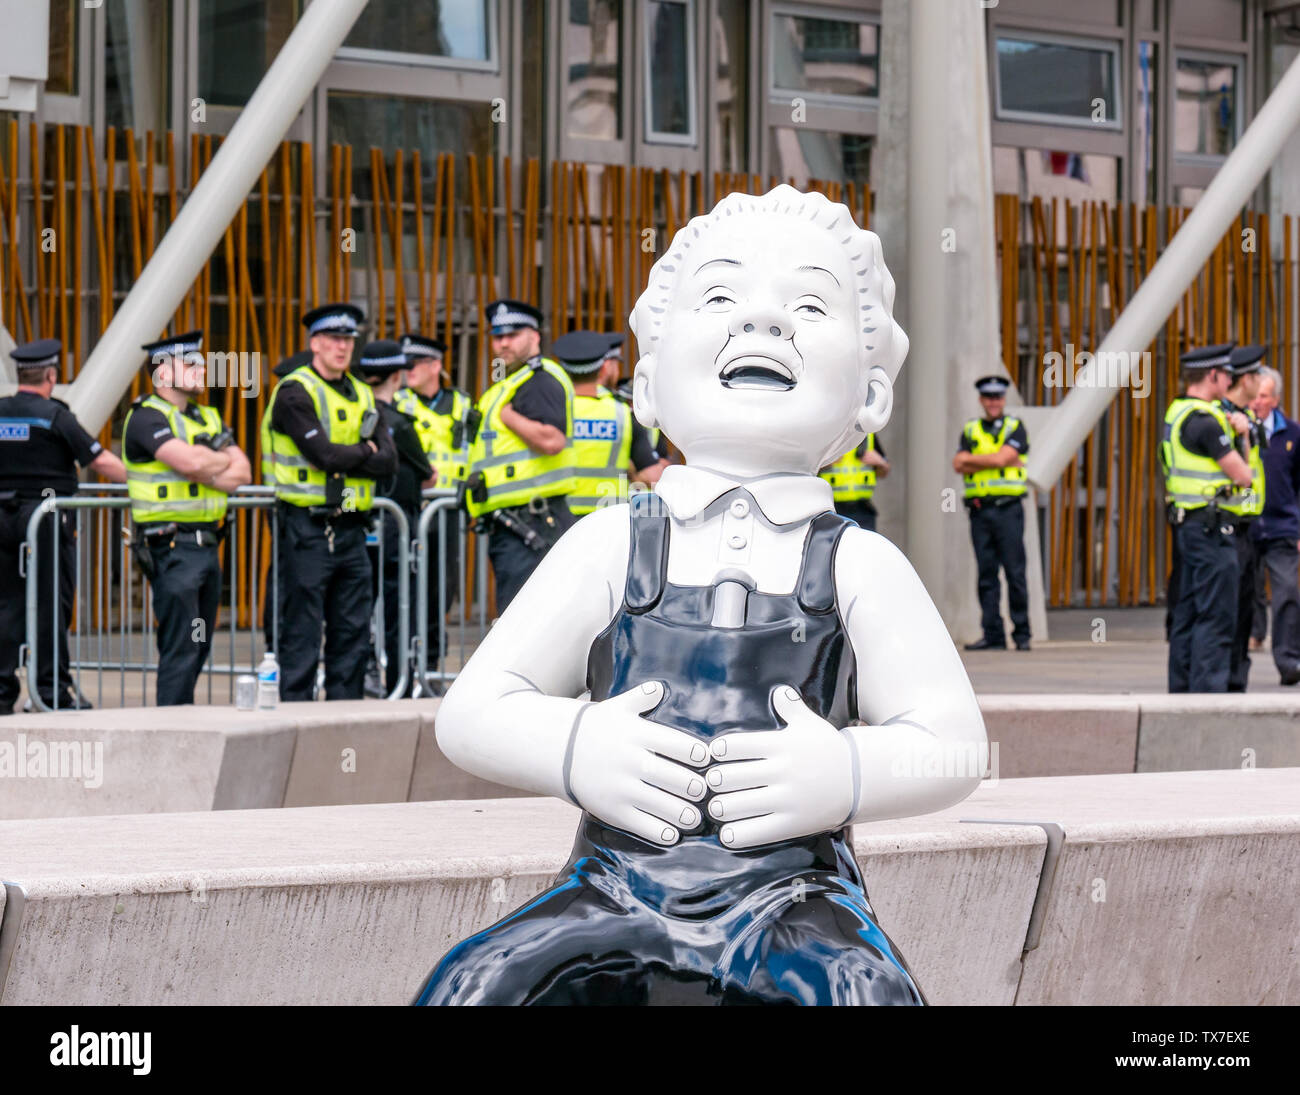 Oor Wullie Big Bucket Art Trail by Peter Davidson, Scottish Pariament during protest with police, Holyrood, Edinburgh, Scotland, UK Stock Photo